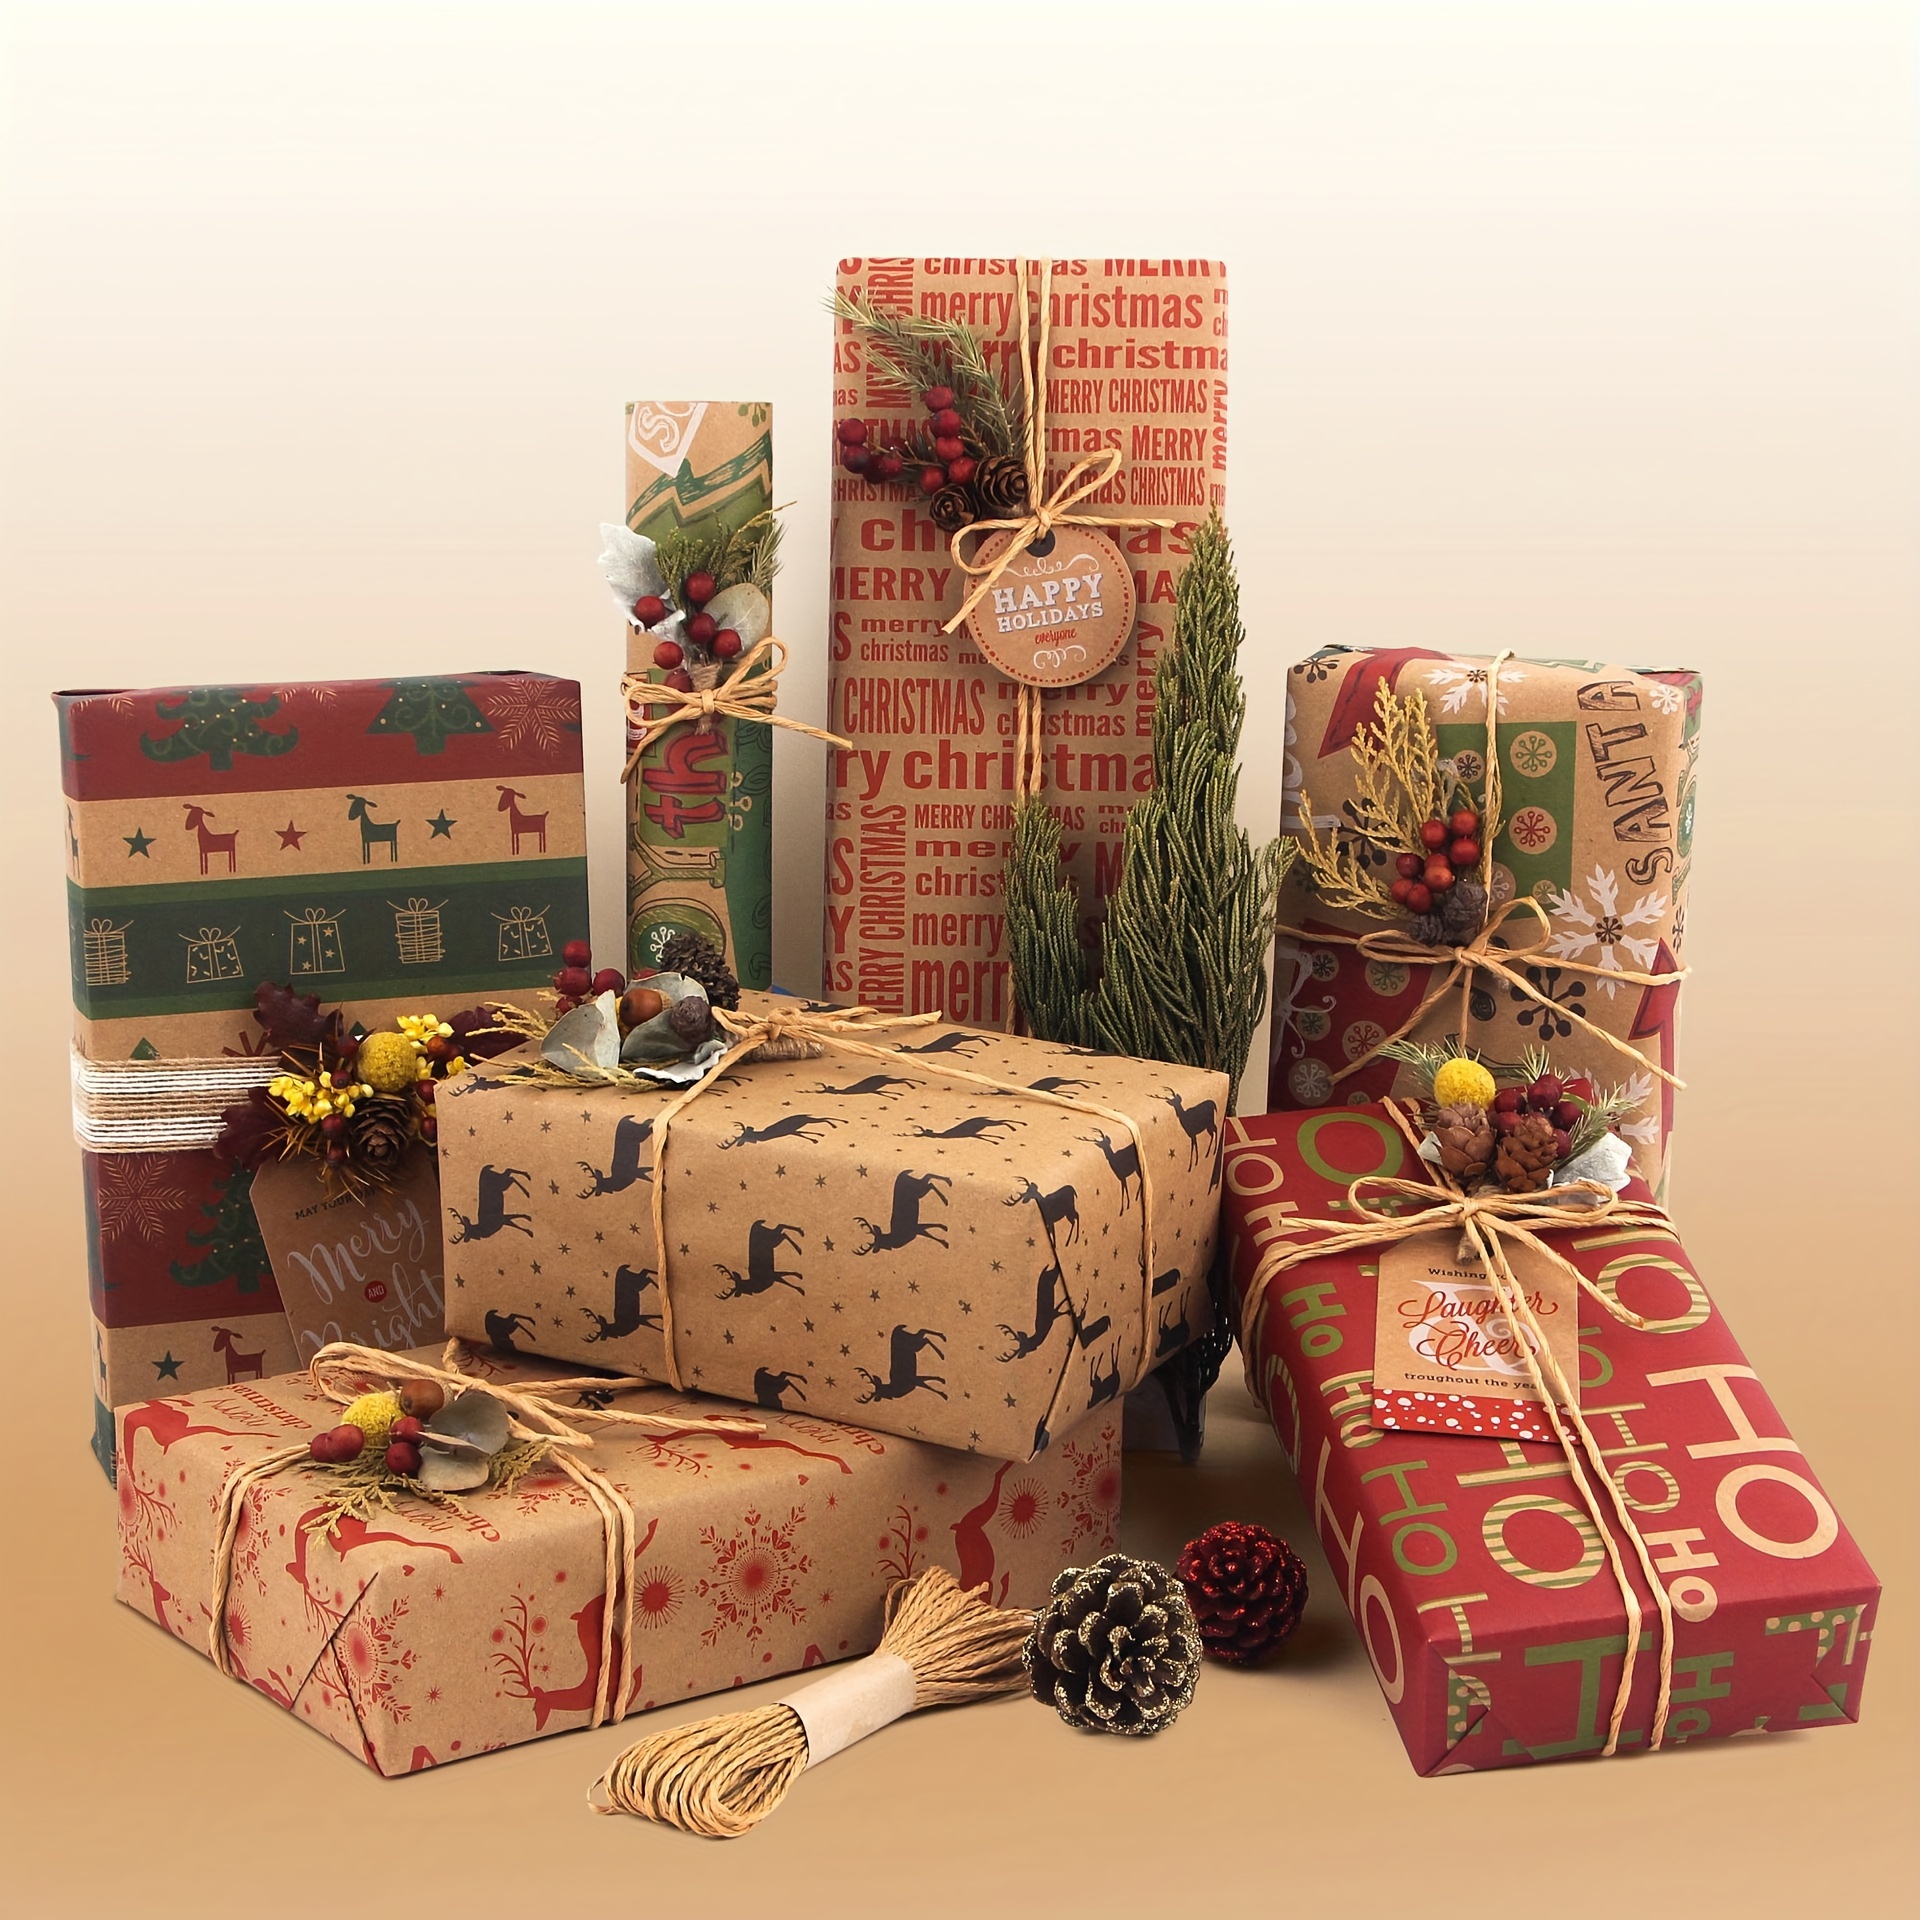 1pc New Christmas Wrapping Paper, Vintage Style Kraft Paper Gift Boxes  Wrapping Paper 50*70cm/19.6*27.5inch, Christmas Gift Wrapping Paper  Christmas Decoration Kraft Paper Vintage Wrapping Paper, Christmas Decor,  Gift Wrapping Paper, Thin Paper